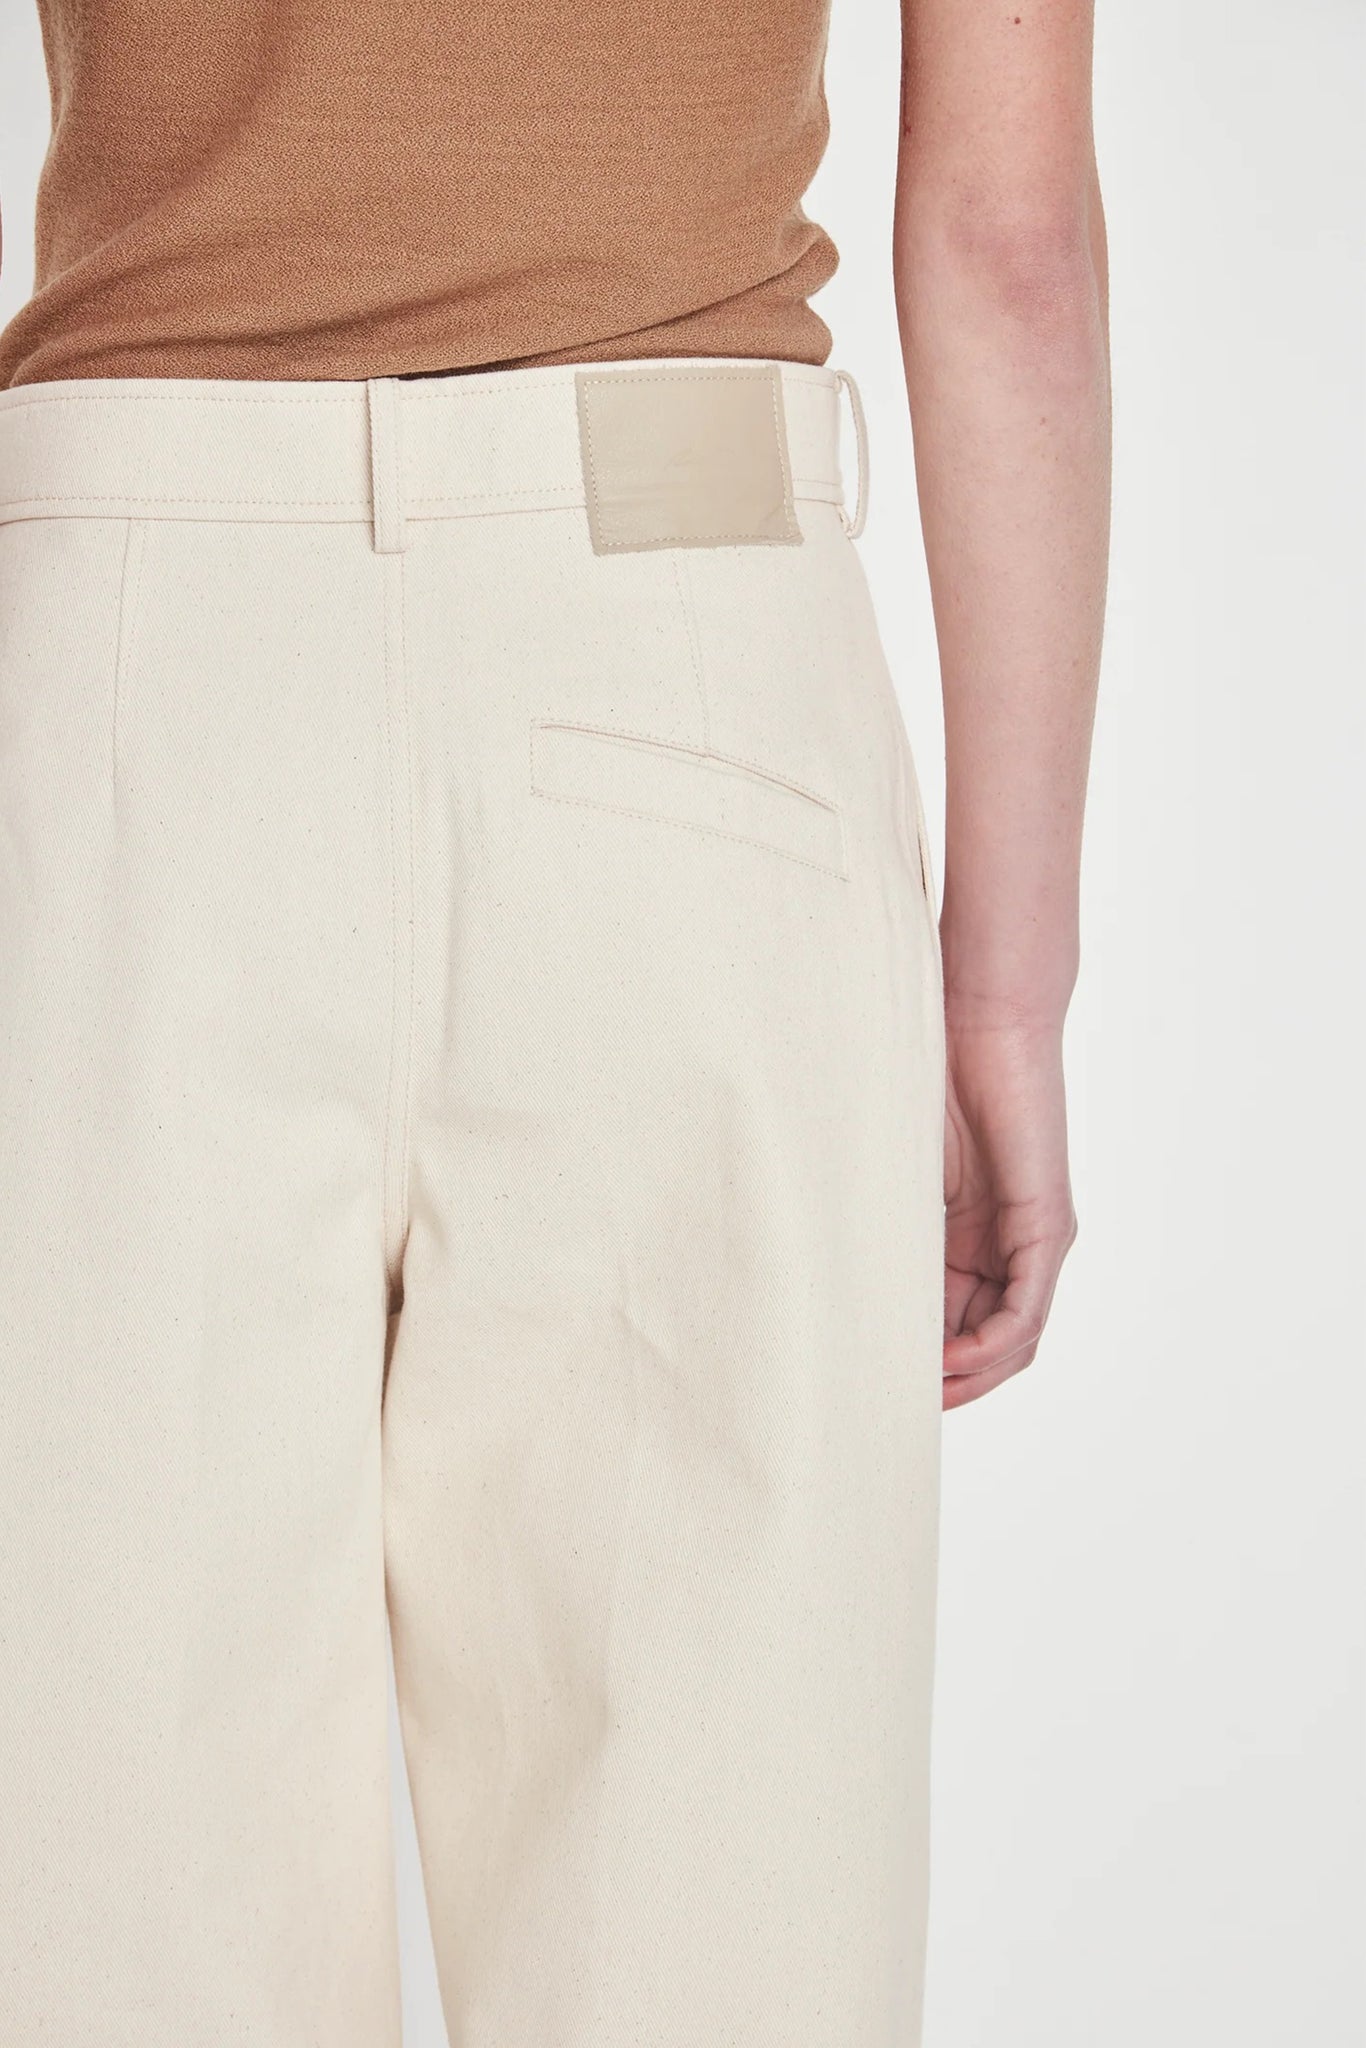 The Work Chino | Japanese Cotton Twill | Natural